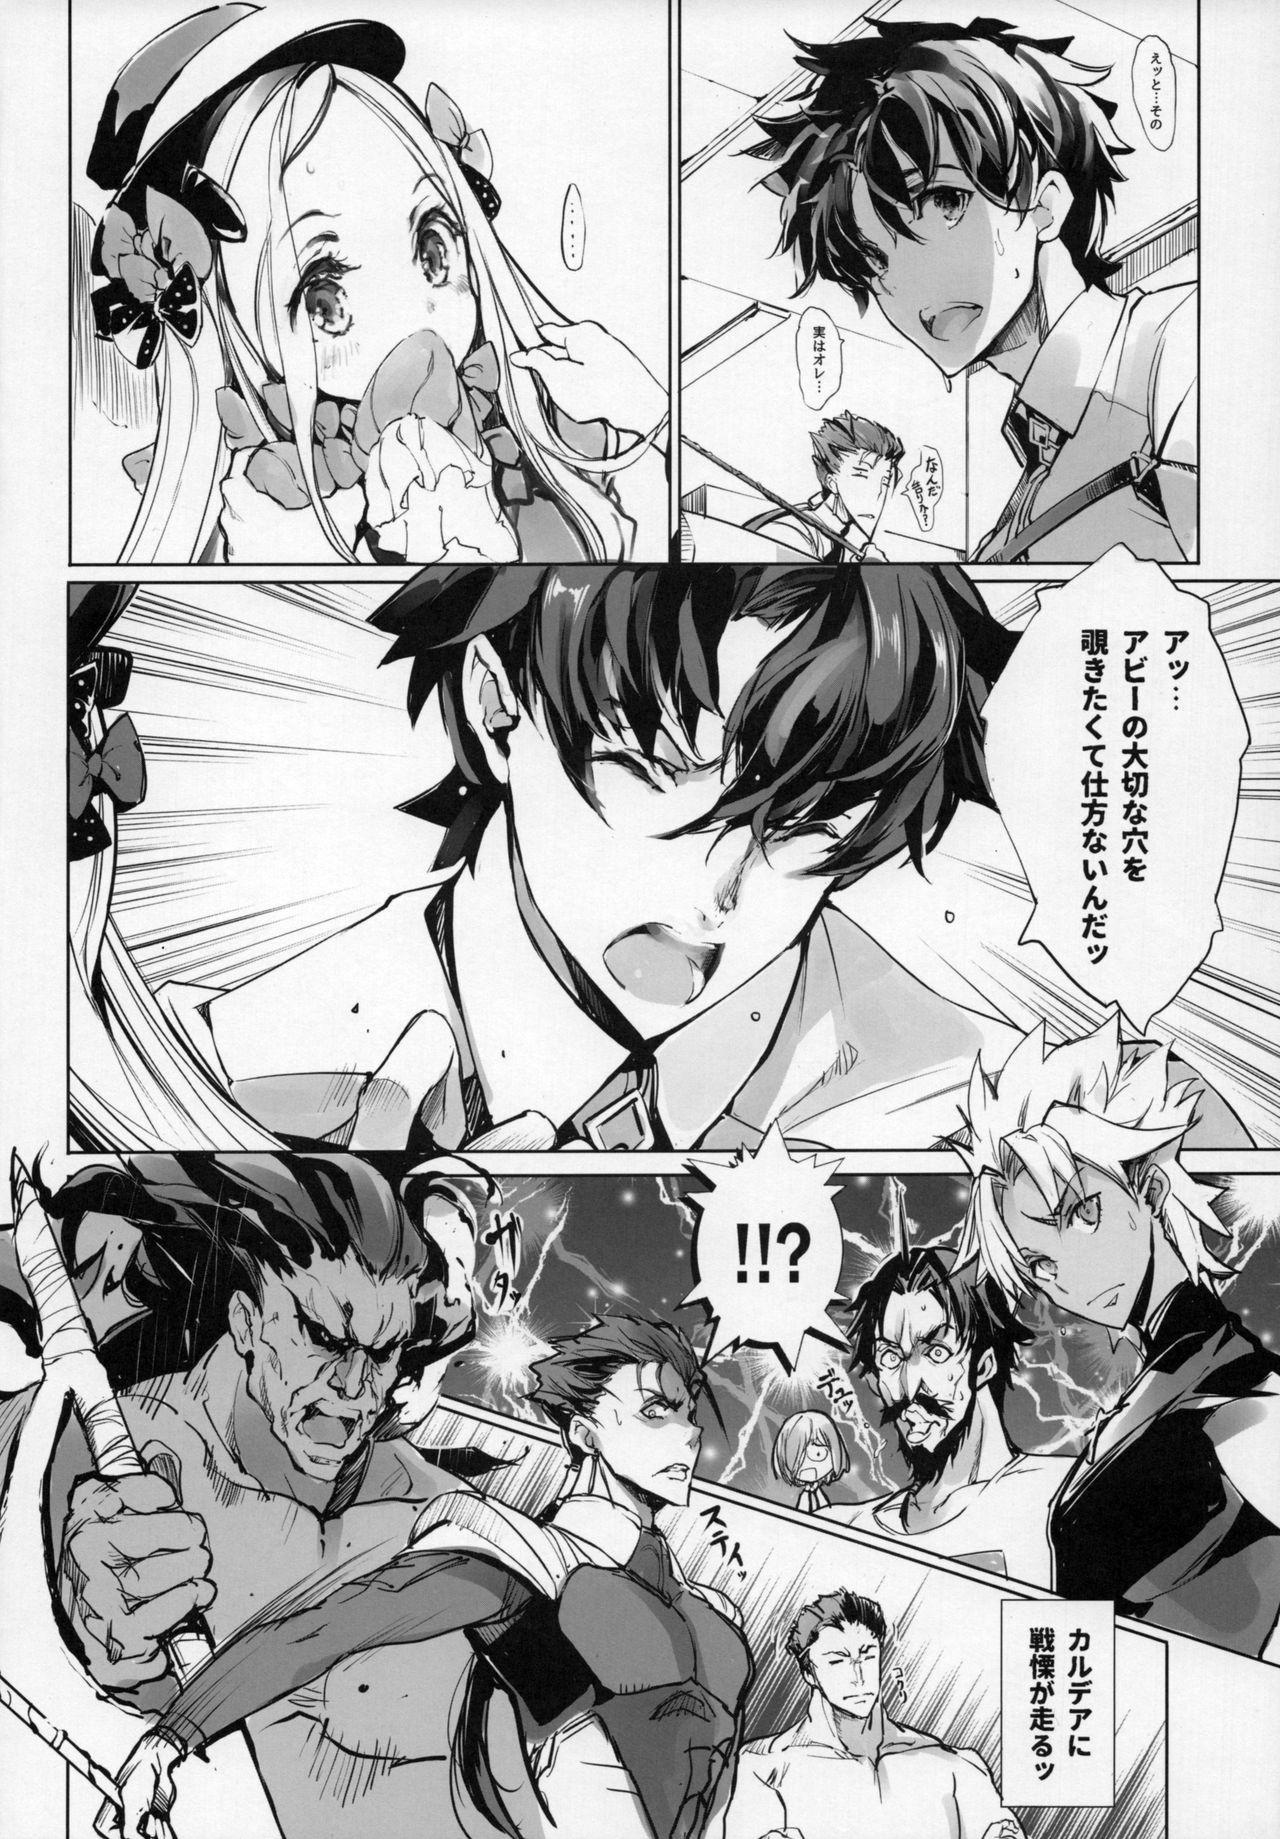 Small Tits Porn Sen no Ko o Haramu Mori no Shoujo - The girl of the woods with a thousand young - Fate grand order Red - Page 7